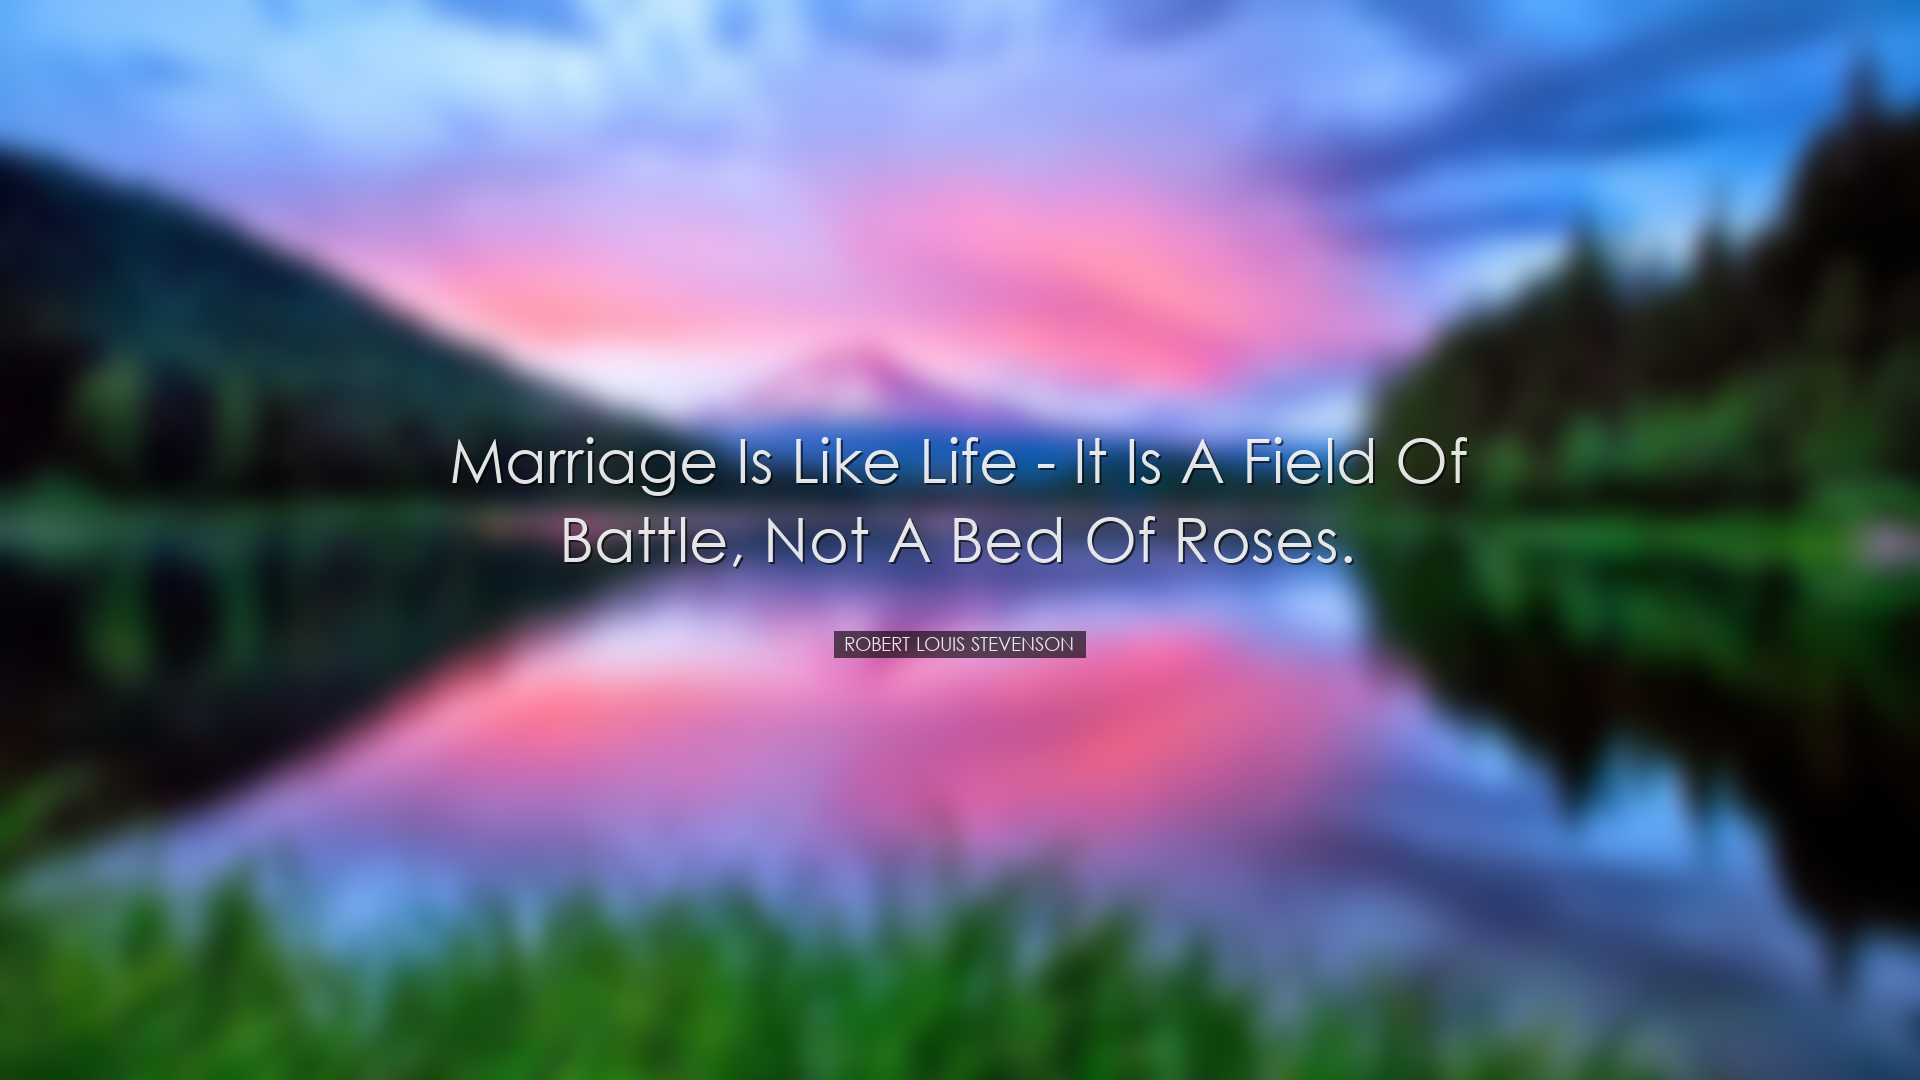 Marriage is like life - it is a field of battle, not a bed of rose